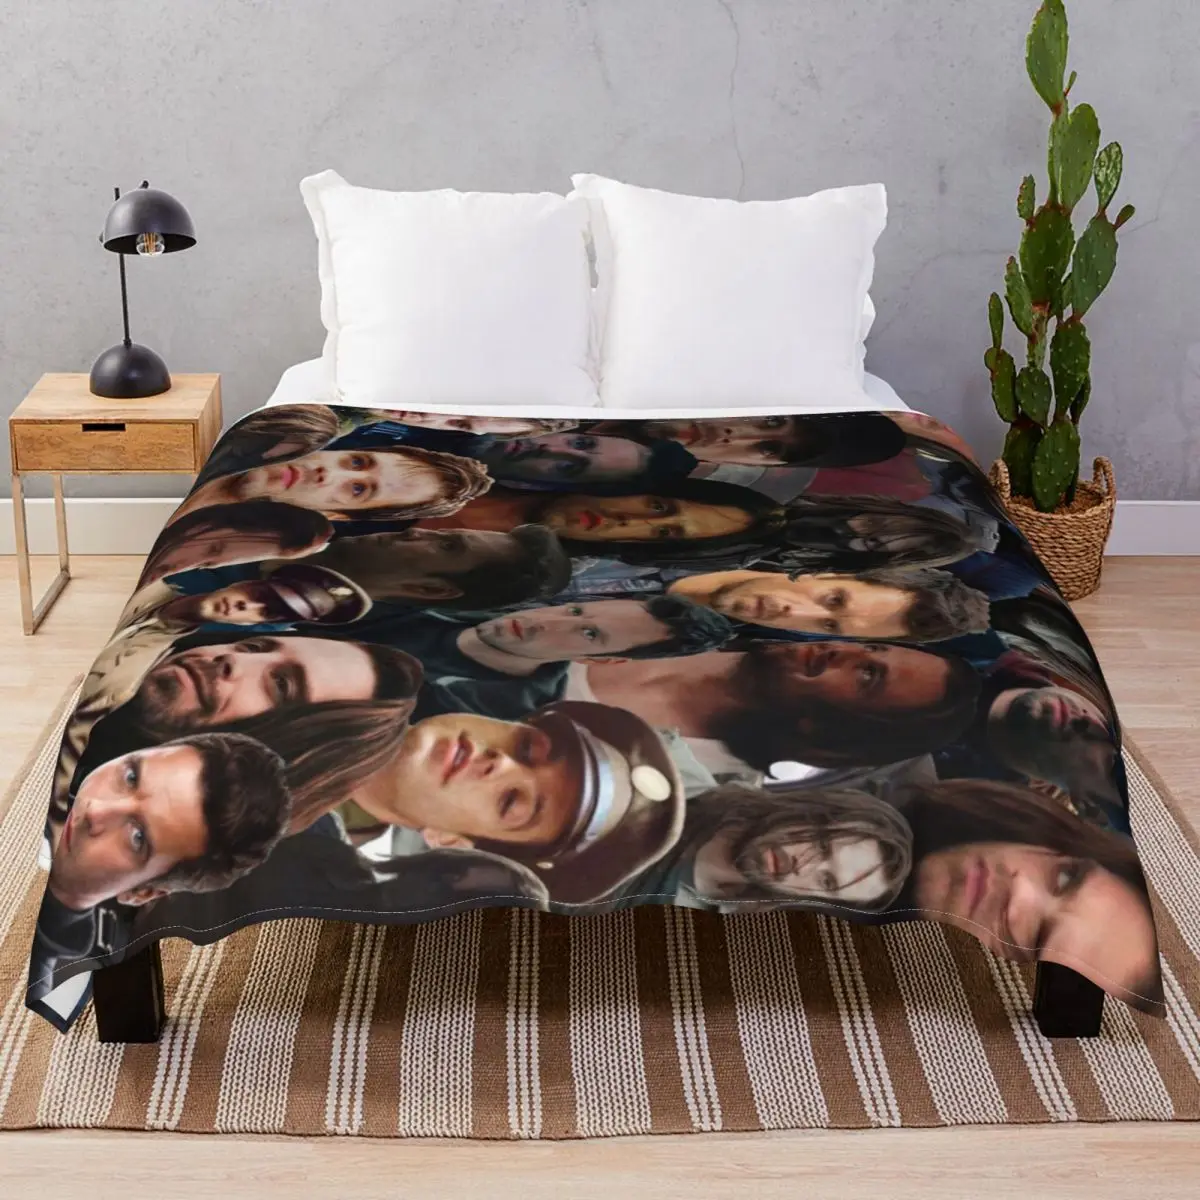 Winter Soldier Photo Collage Blanket Velvet Print Comfortable Unisex Throw Blankets for Bed Home Couch Travel Office